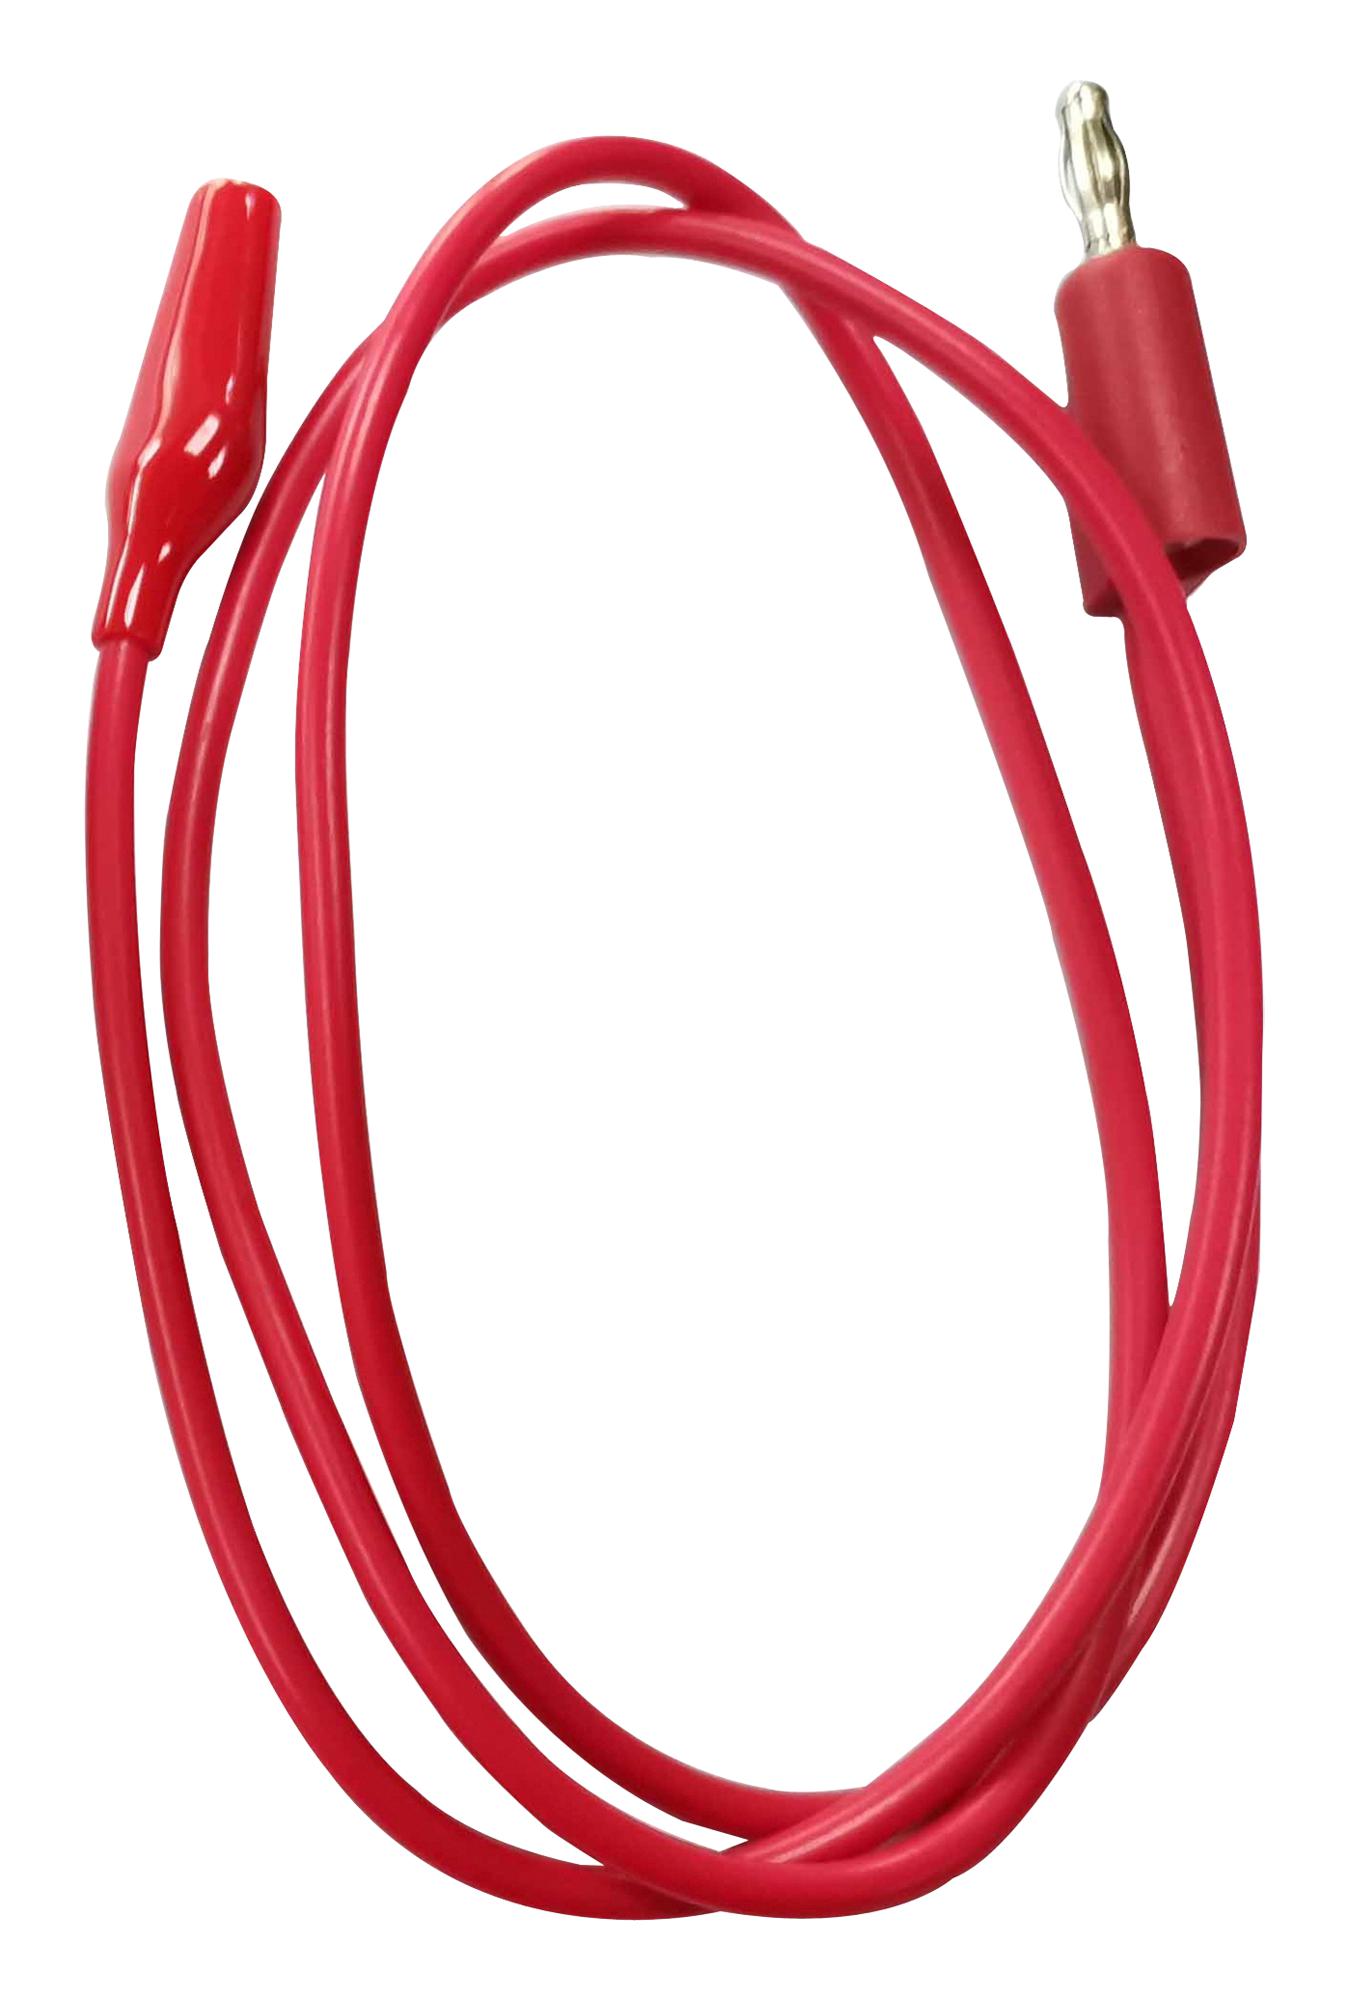 MP770273 TEST LEAD, 5A, 60V, 305MM, RED MULTICOMP PRO